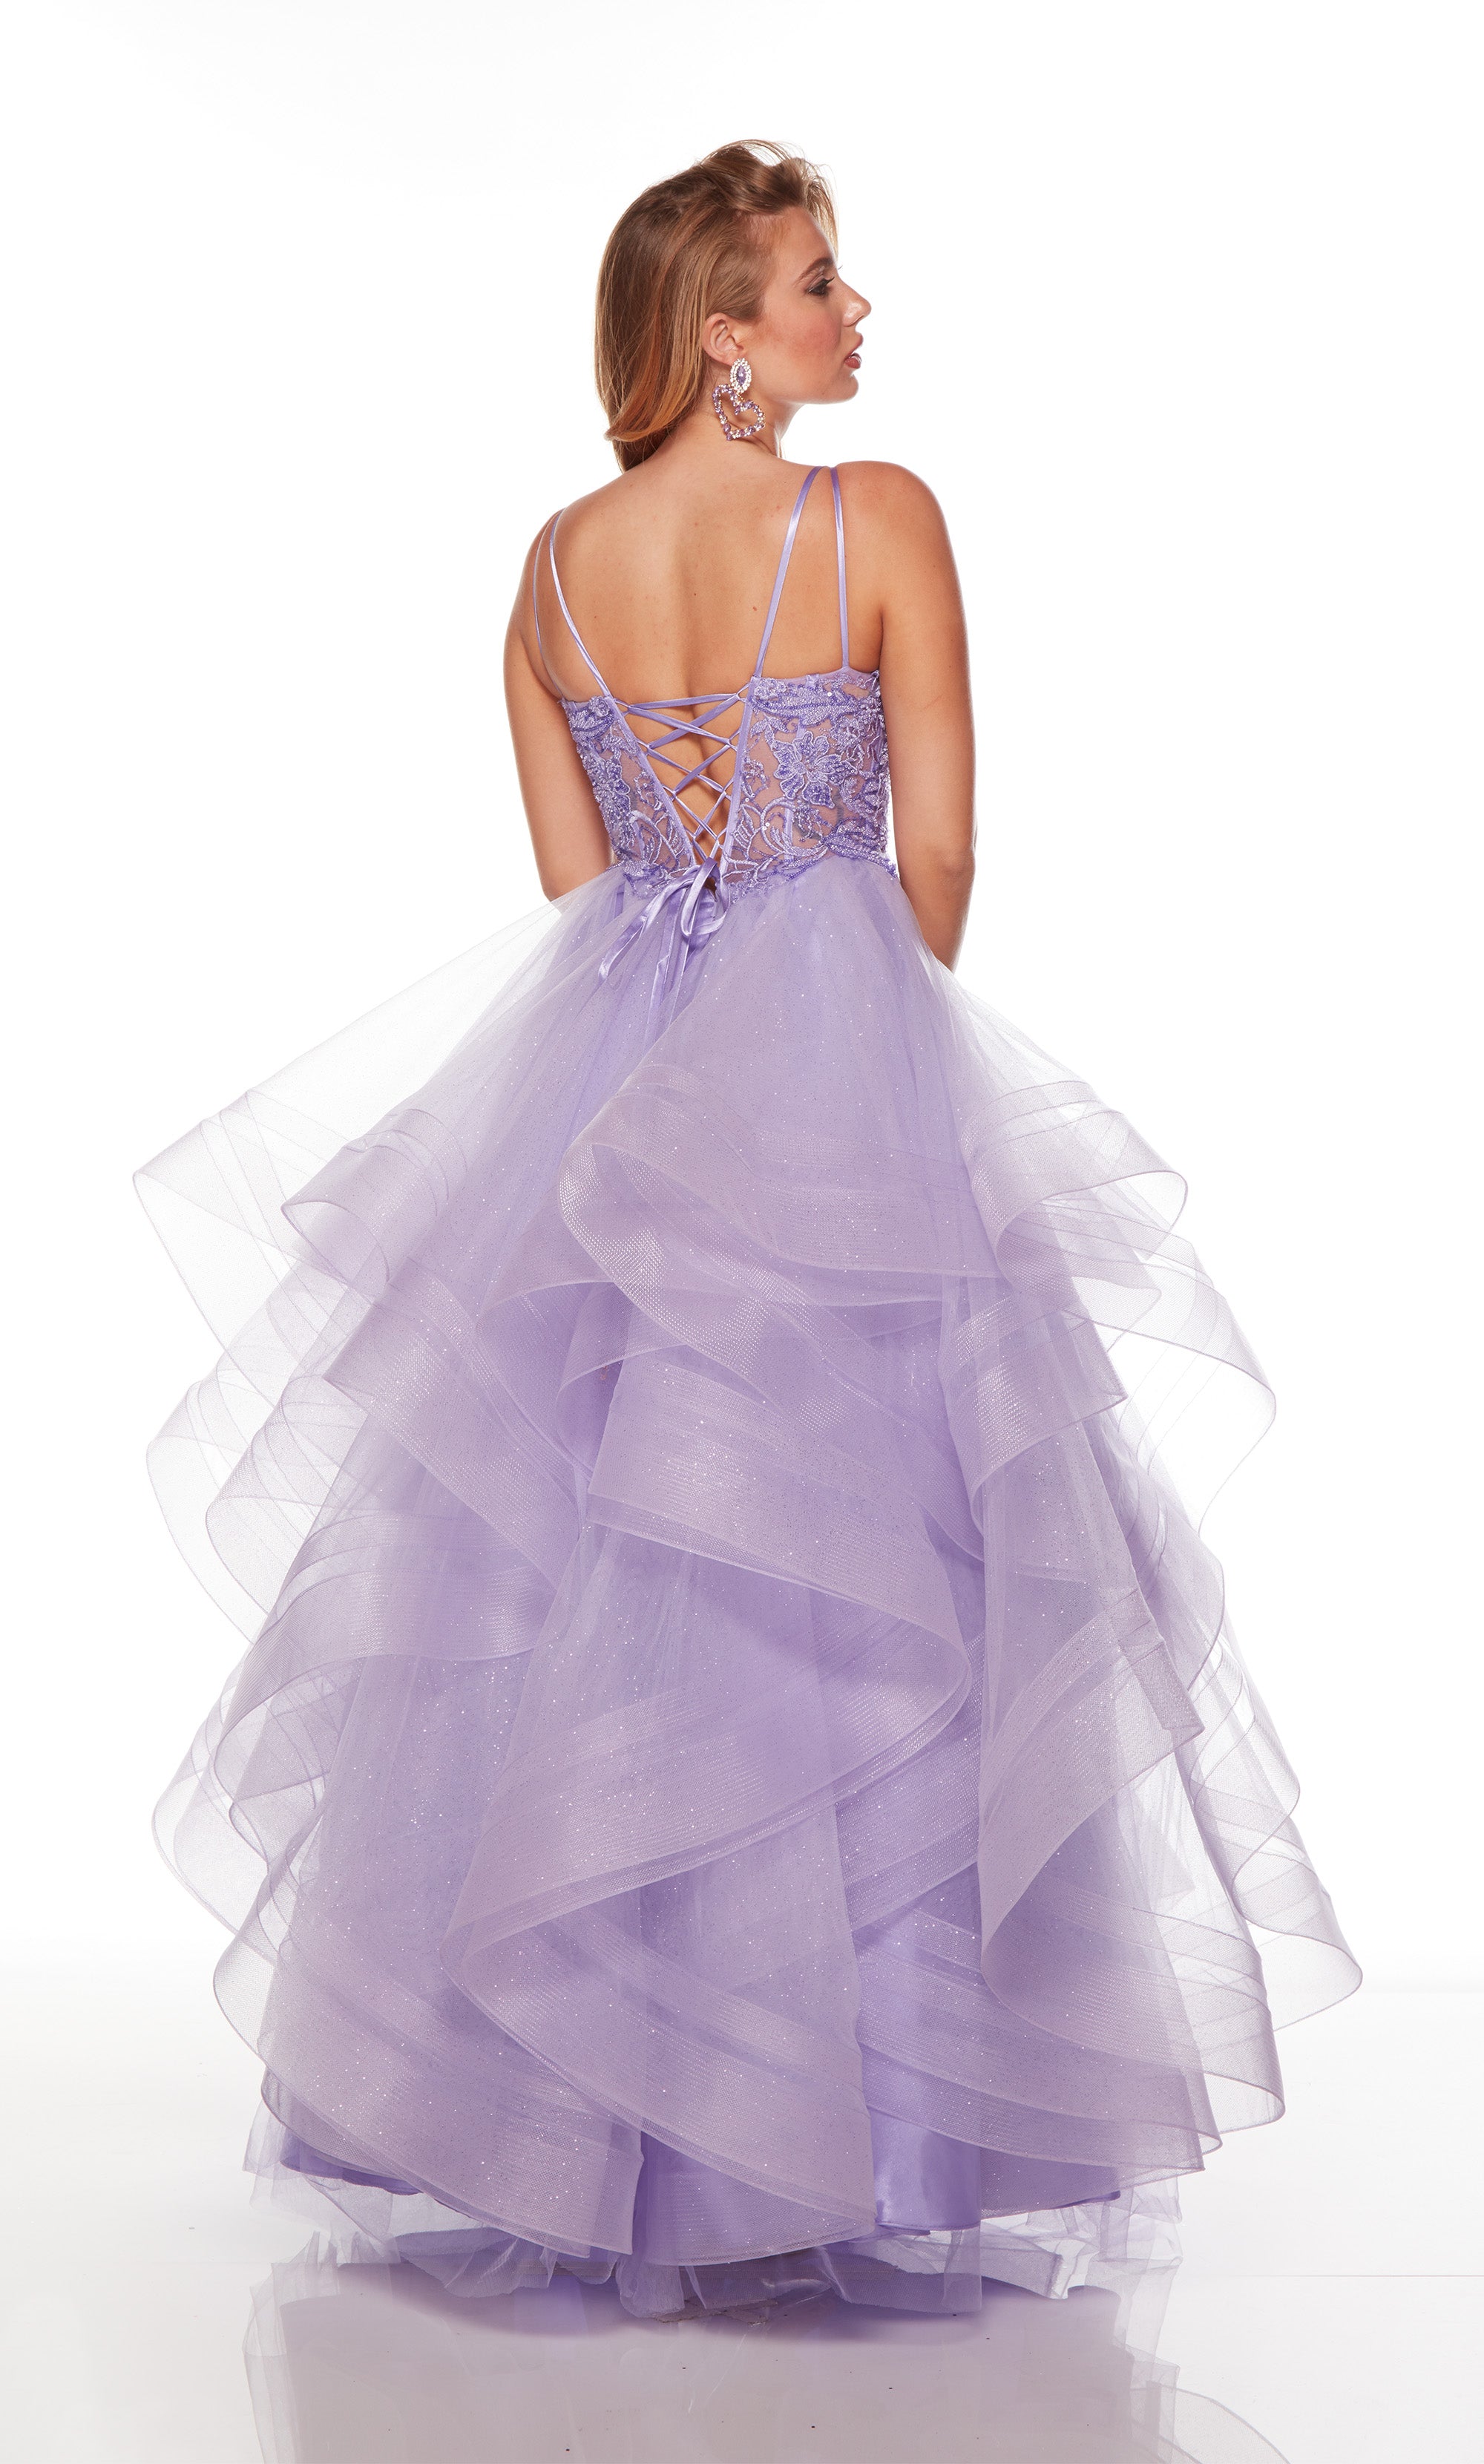 Lilac Purple Prom Dresses 2023 2022 With Cascading Ruffles, Organza Fabric,  Strapless Design, Zipper Back, Sleeveless, And Crystals Sash Perfect For  Formal Events And Quinceaneras From Uniquebridalboutique, $140.96 |  DHgate.Com